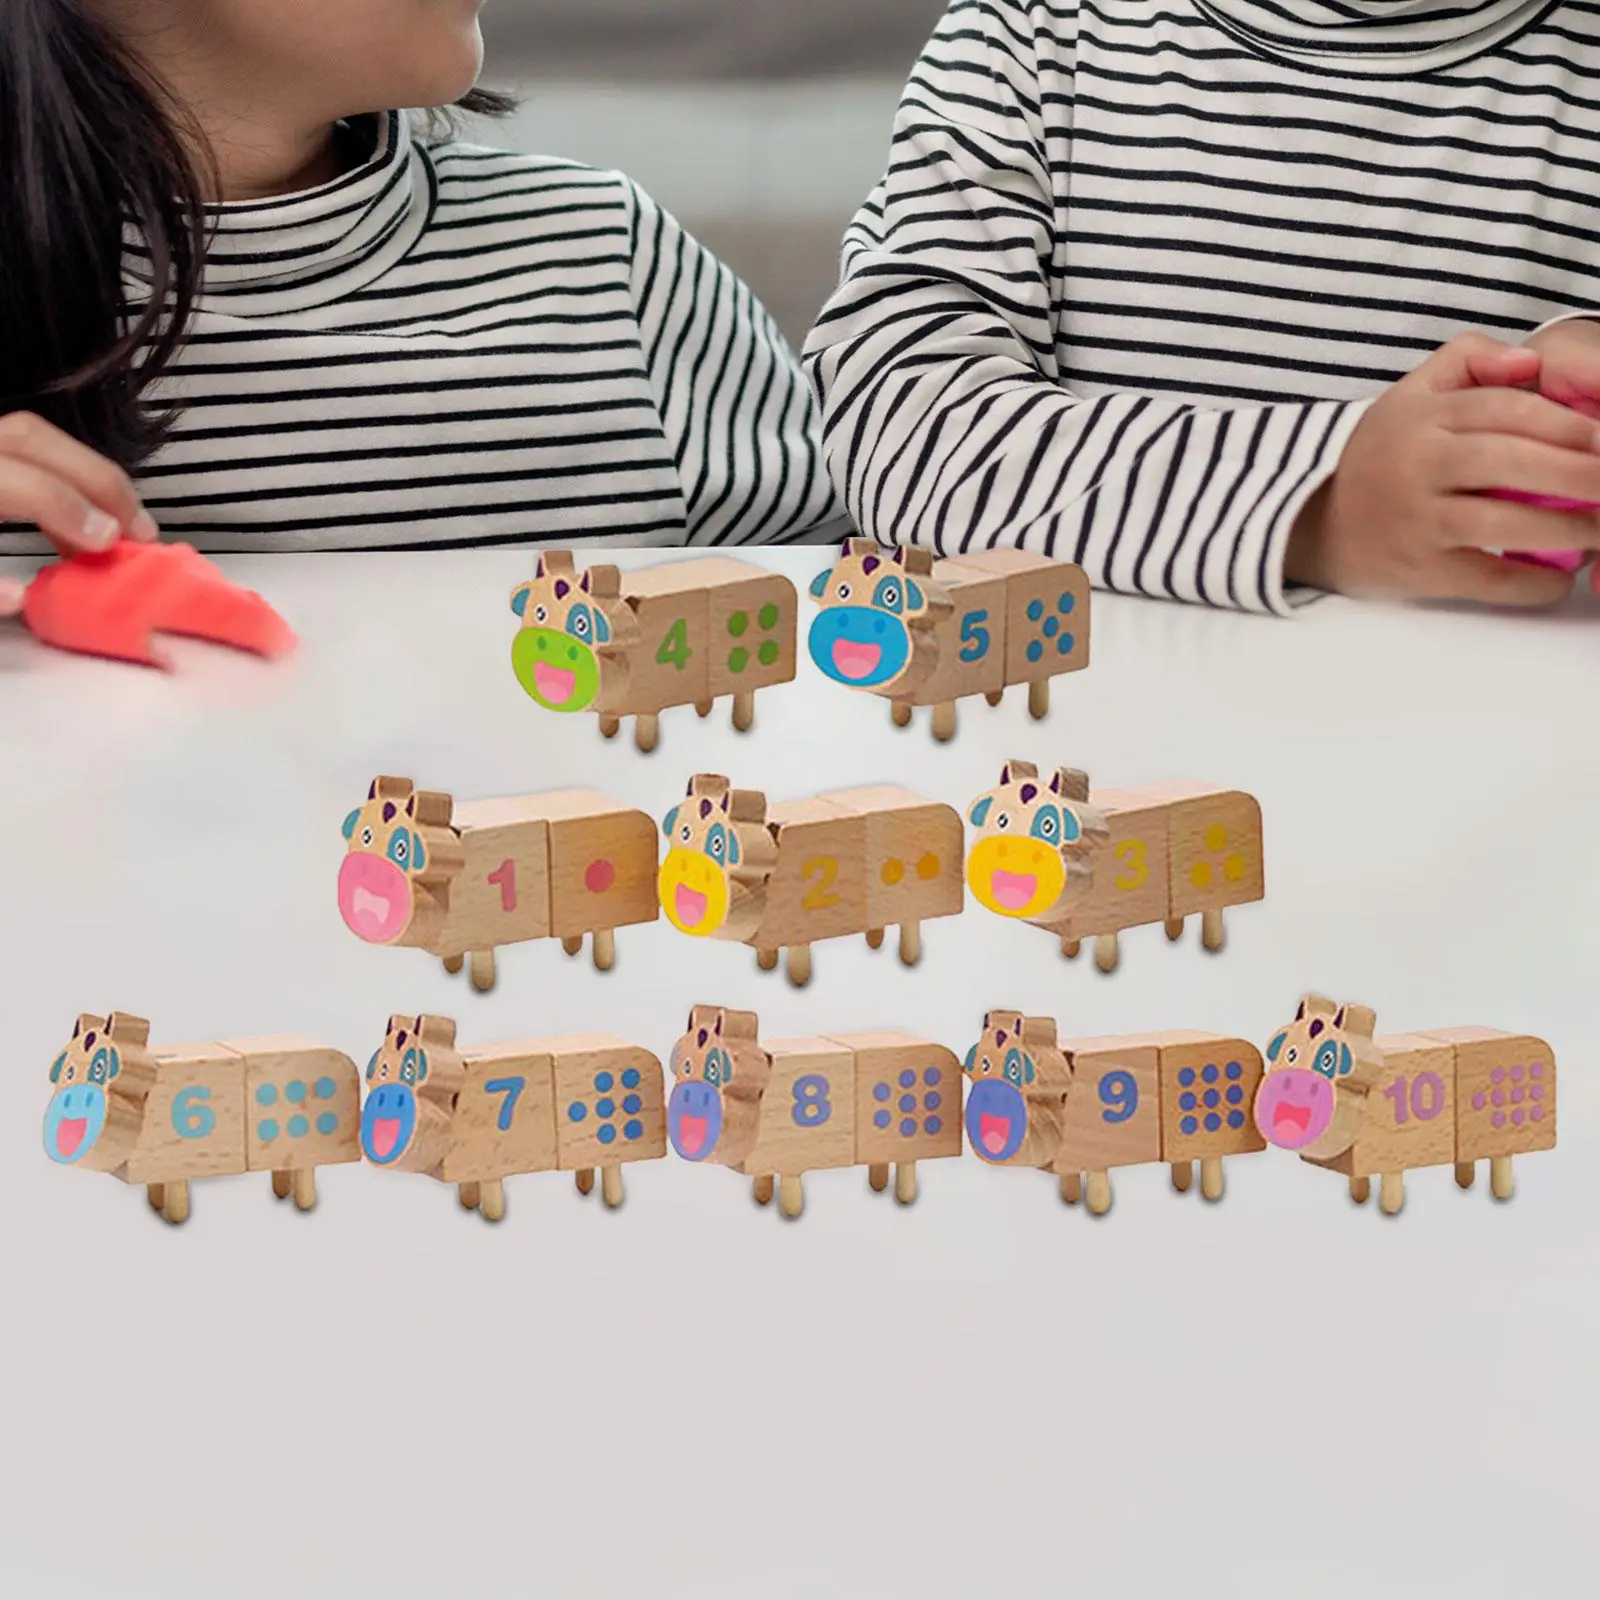 10 Pieces Wooden Building Blocks Preschool Learning Activities Colored Alphabet Number Stacking Blocks for Girls Holiday Gifts